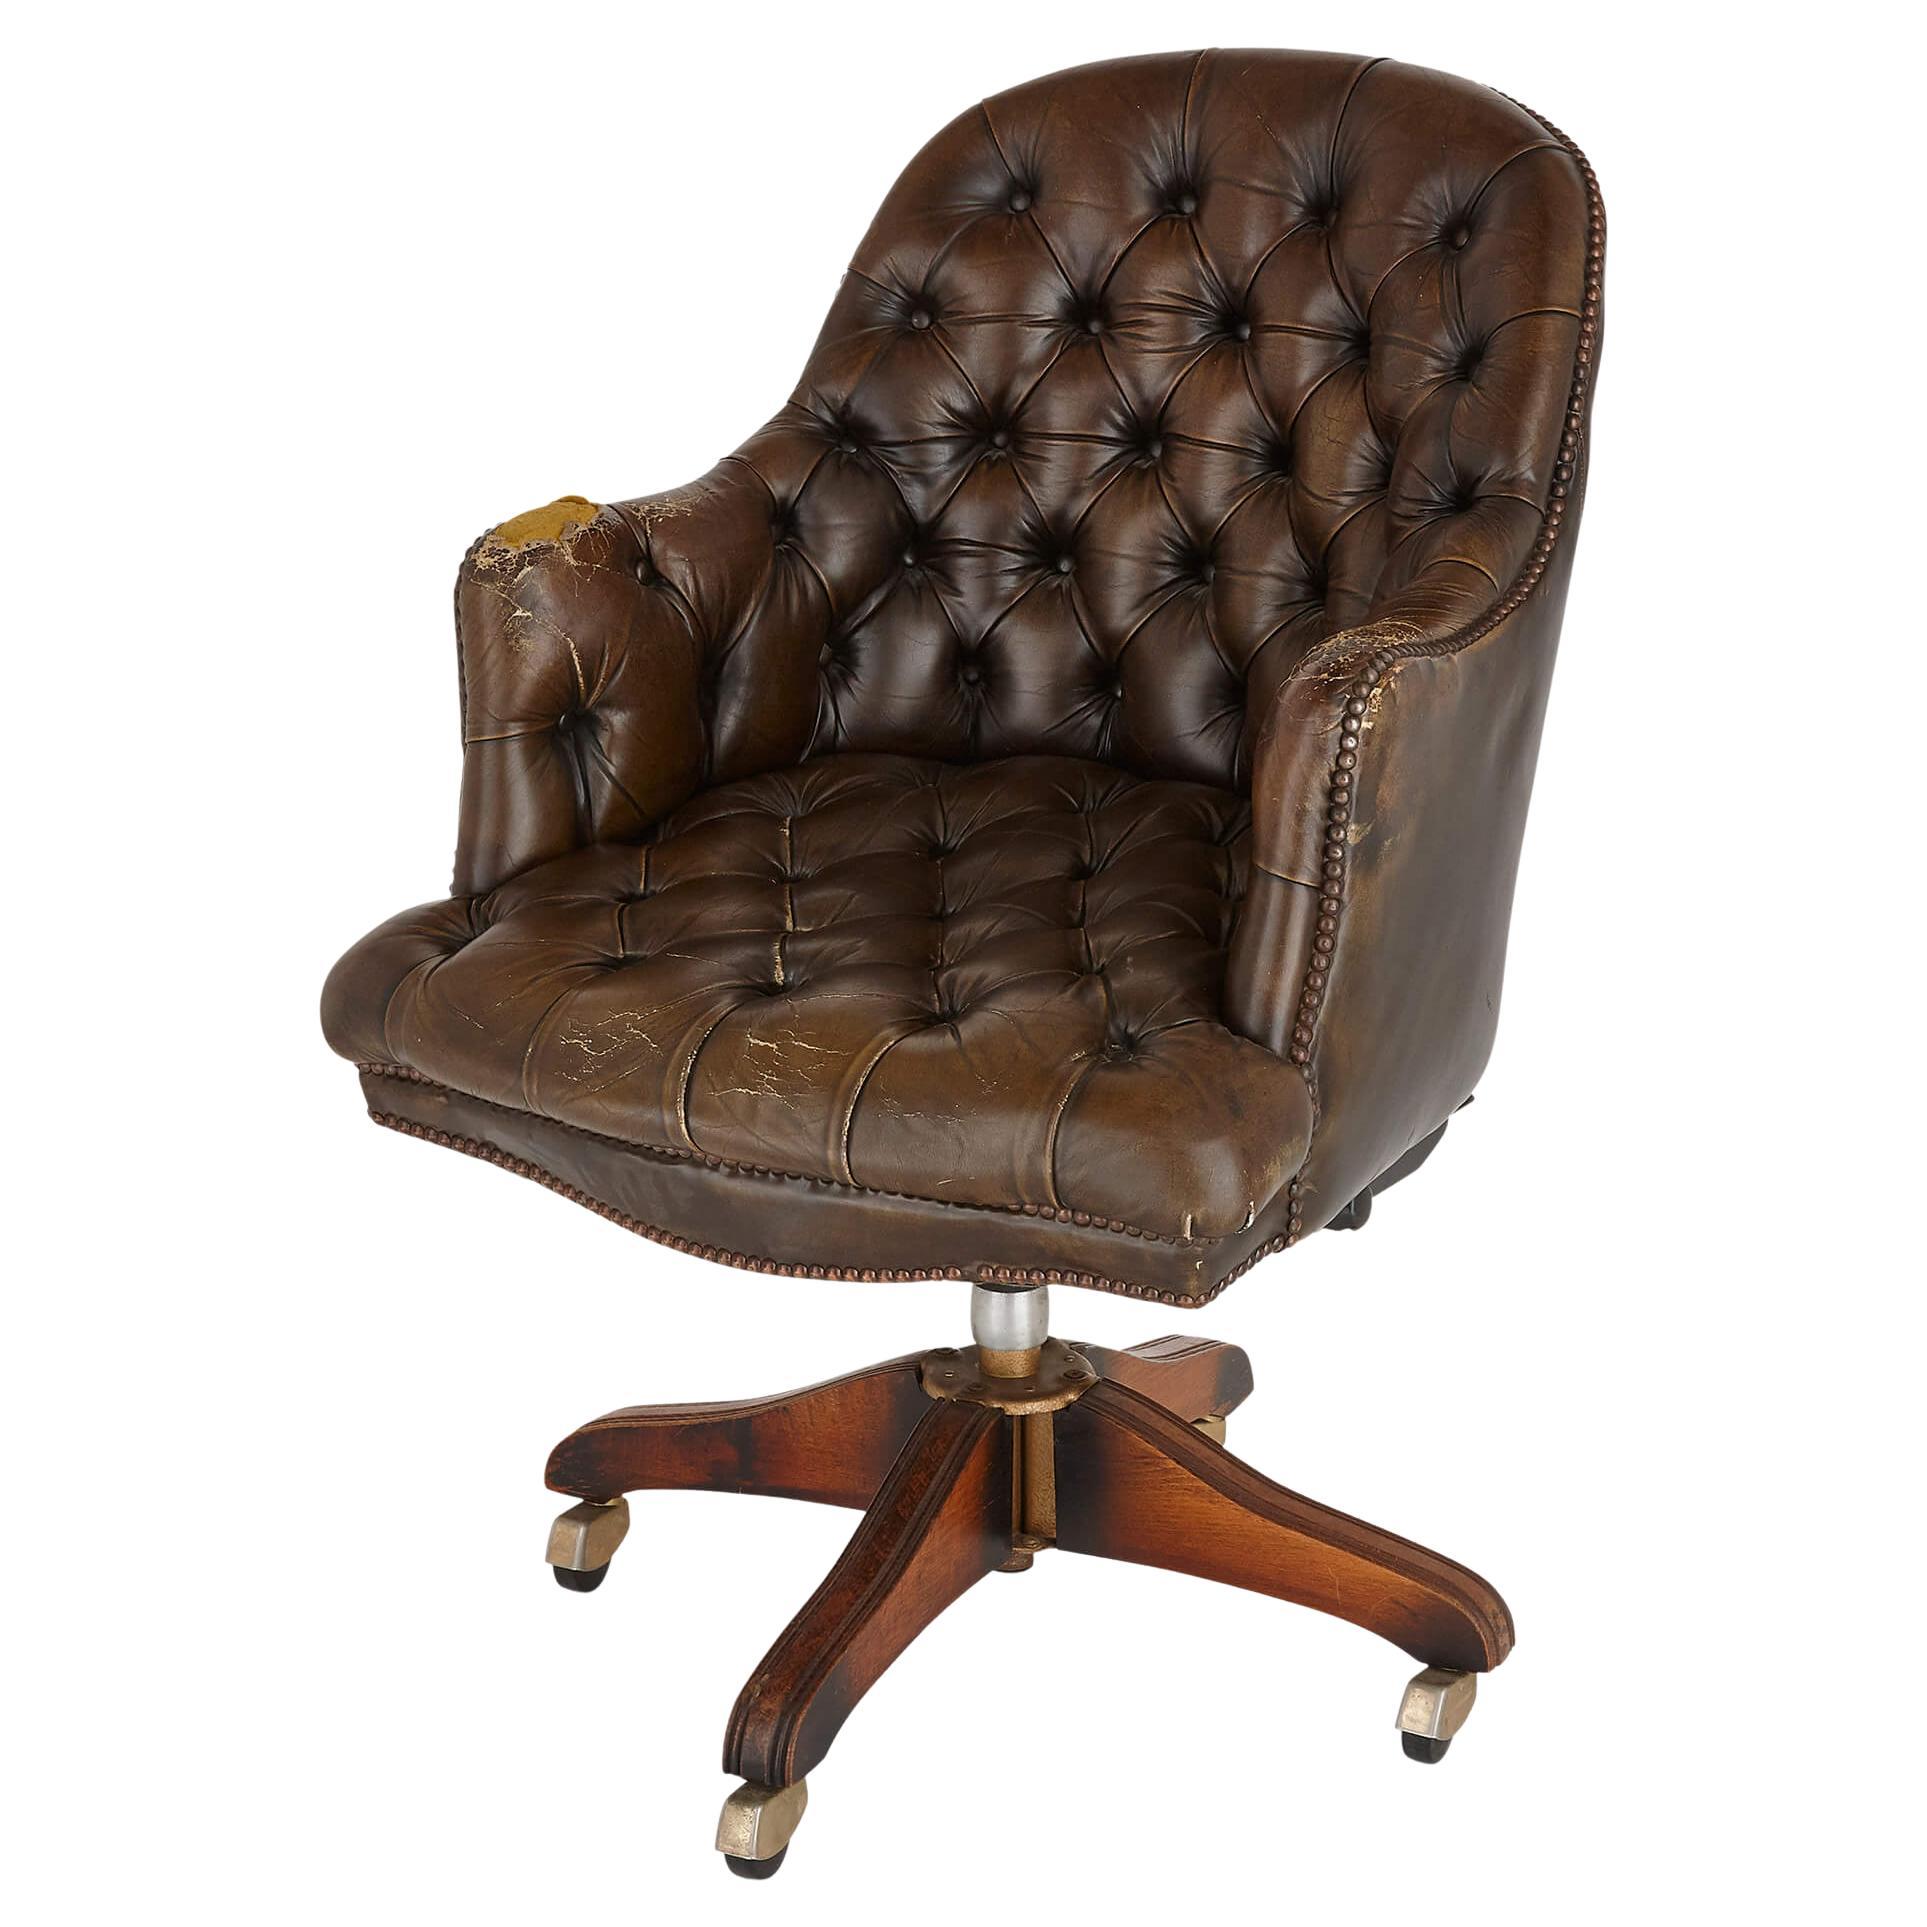 English Leather Desk Chair in the Georgian Style